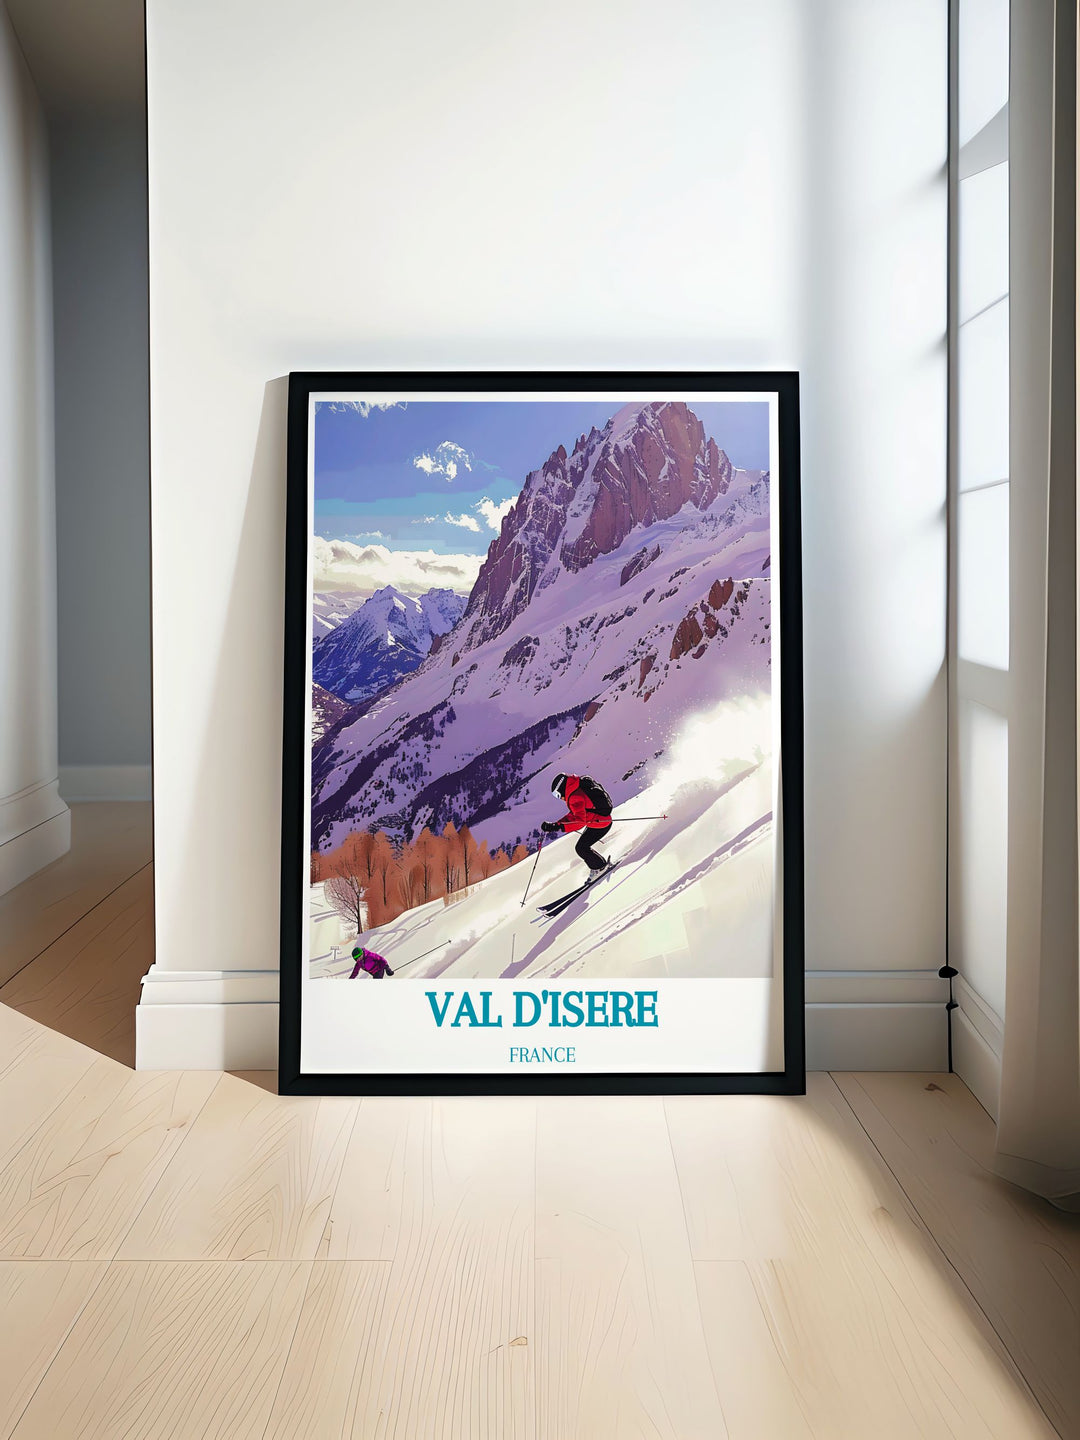 Experience the thrill of La Face de Bellevarde in Val dIsere with this vibrant travel poster, showcasing its legendary ski slope.